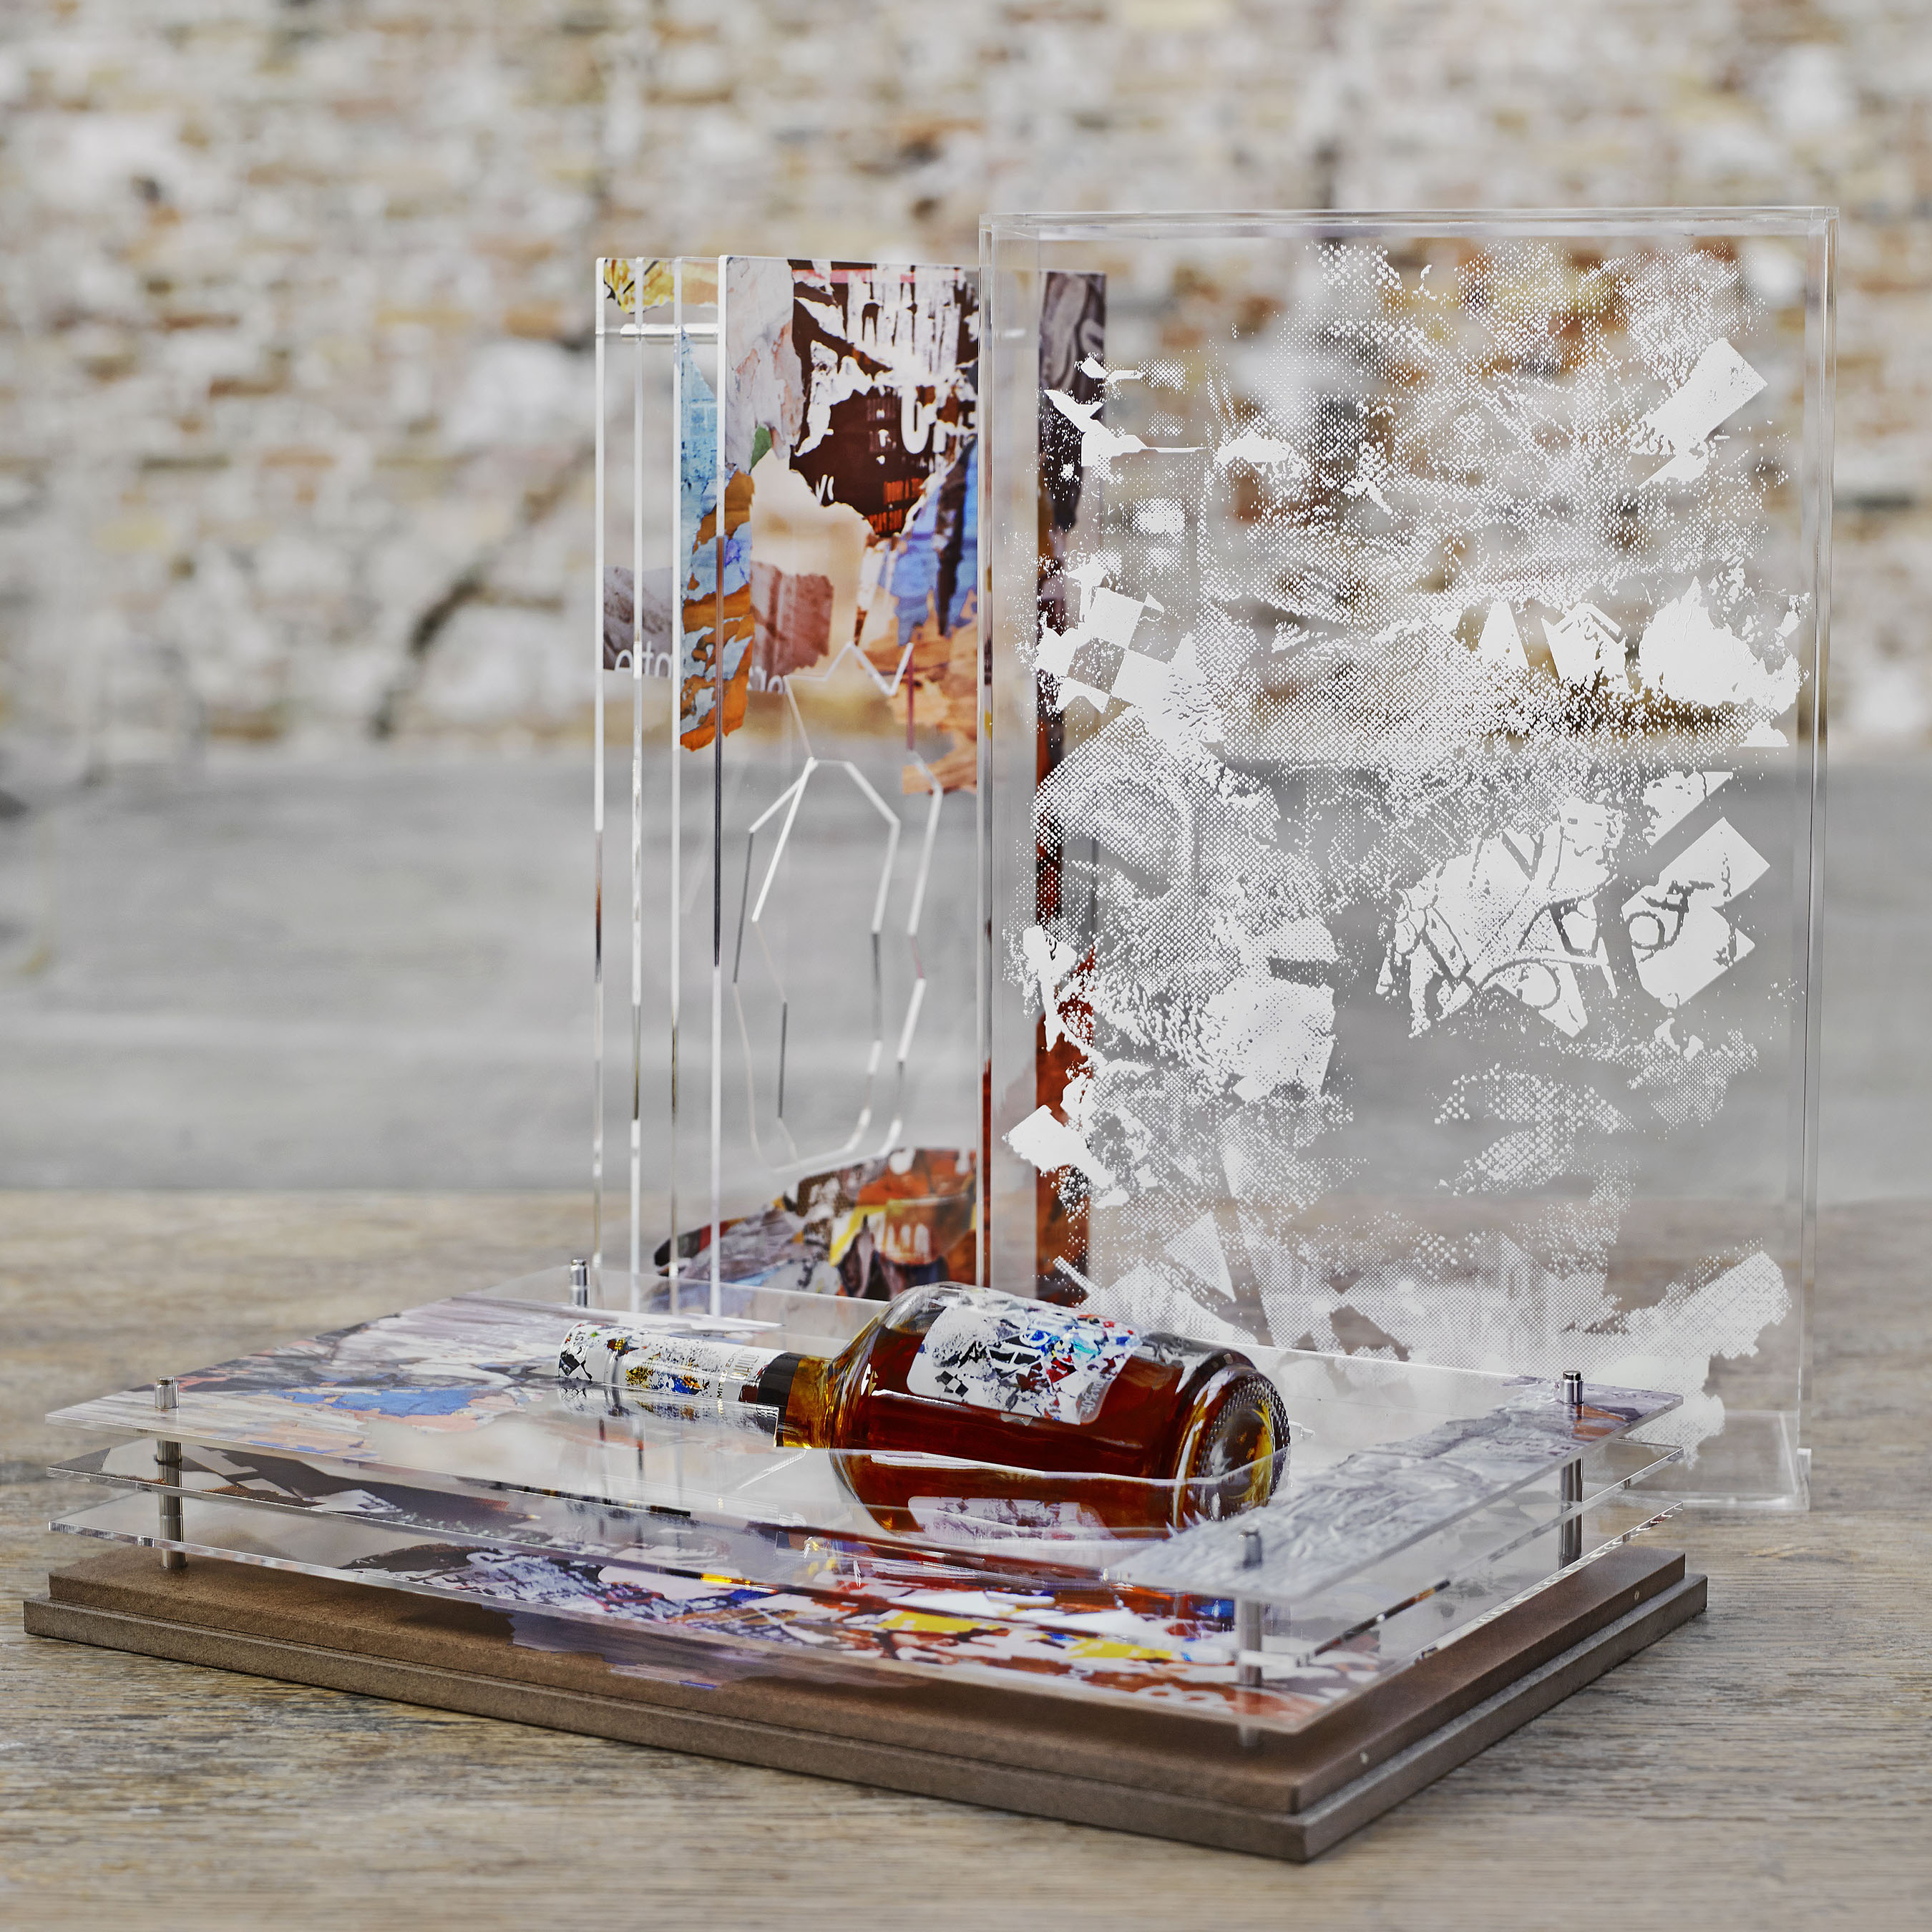 Hennessy V.S. Cognac Limited Edition by VHILS